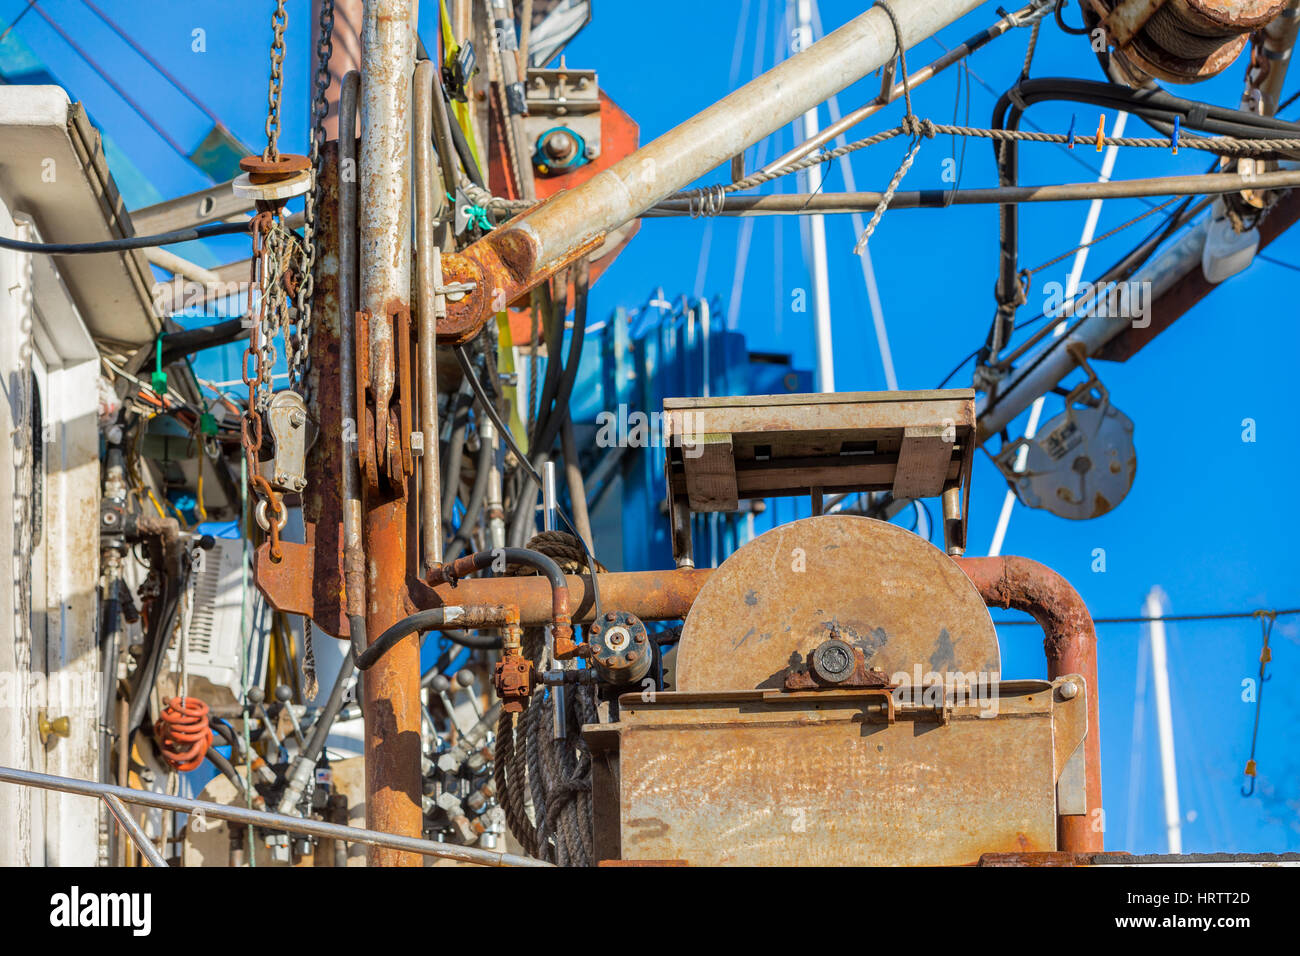 detail image of equipment on a fishing boat in Montuak, NY Stock Photo